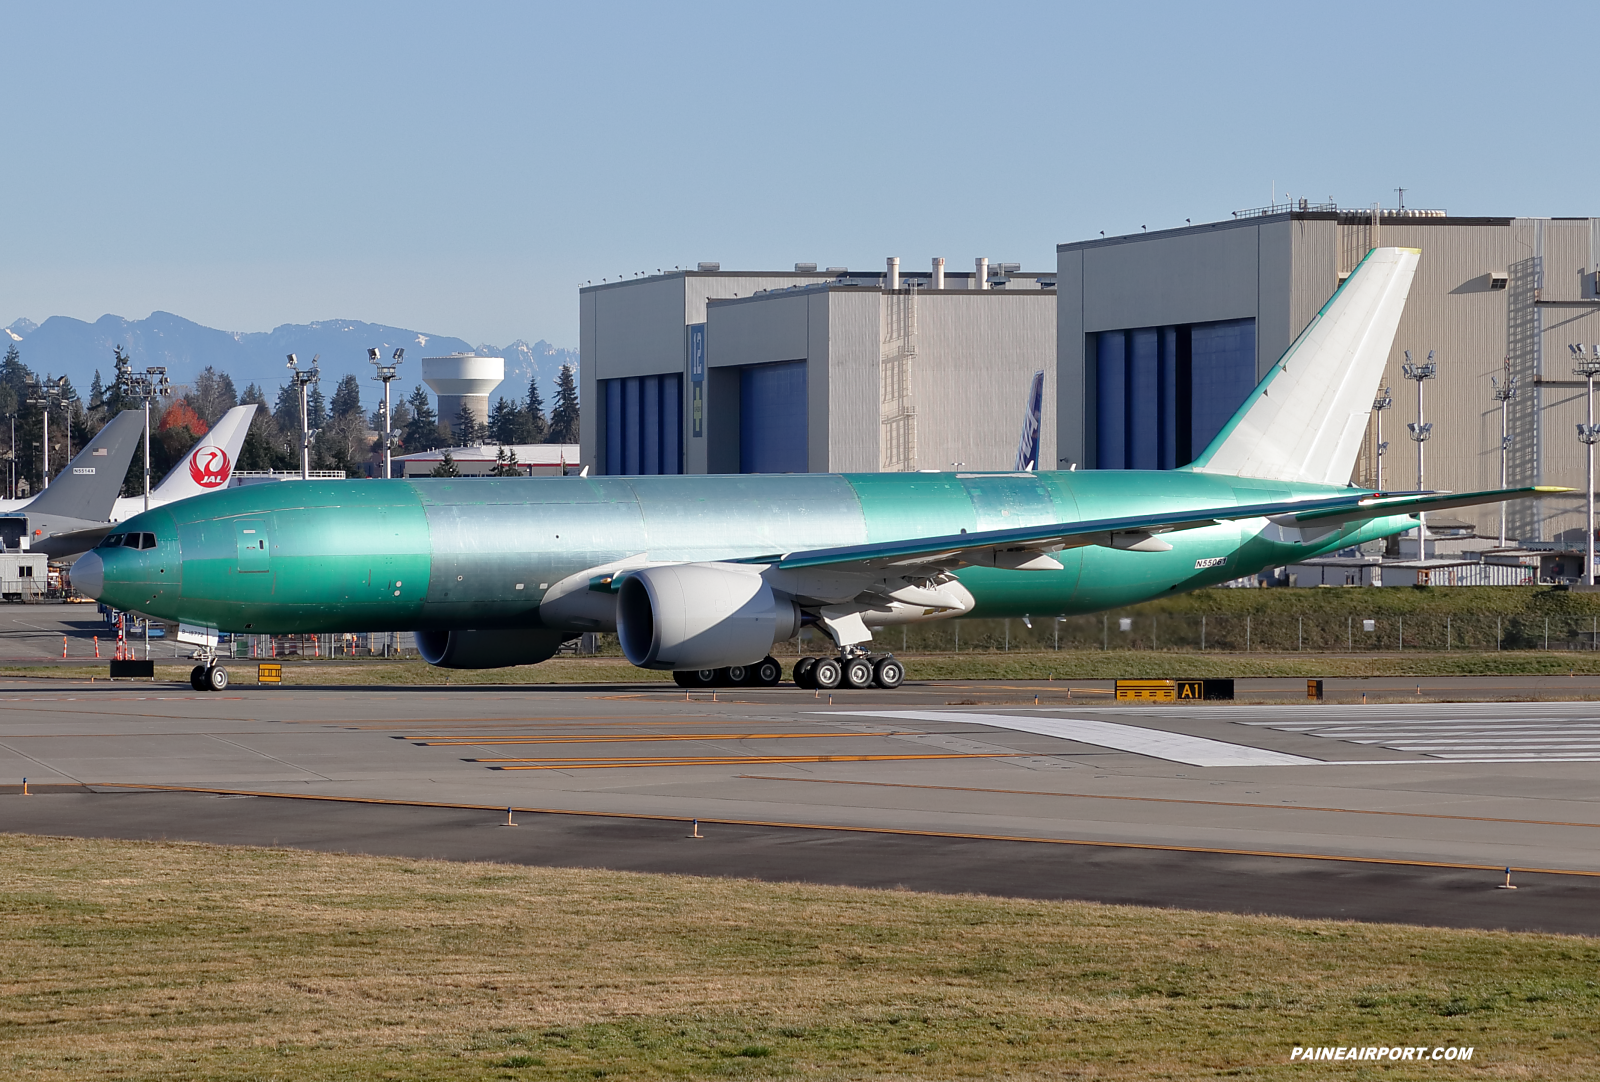 China Airlines 777F B-18772 at KPAE Paine Field